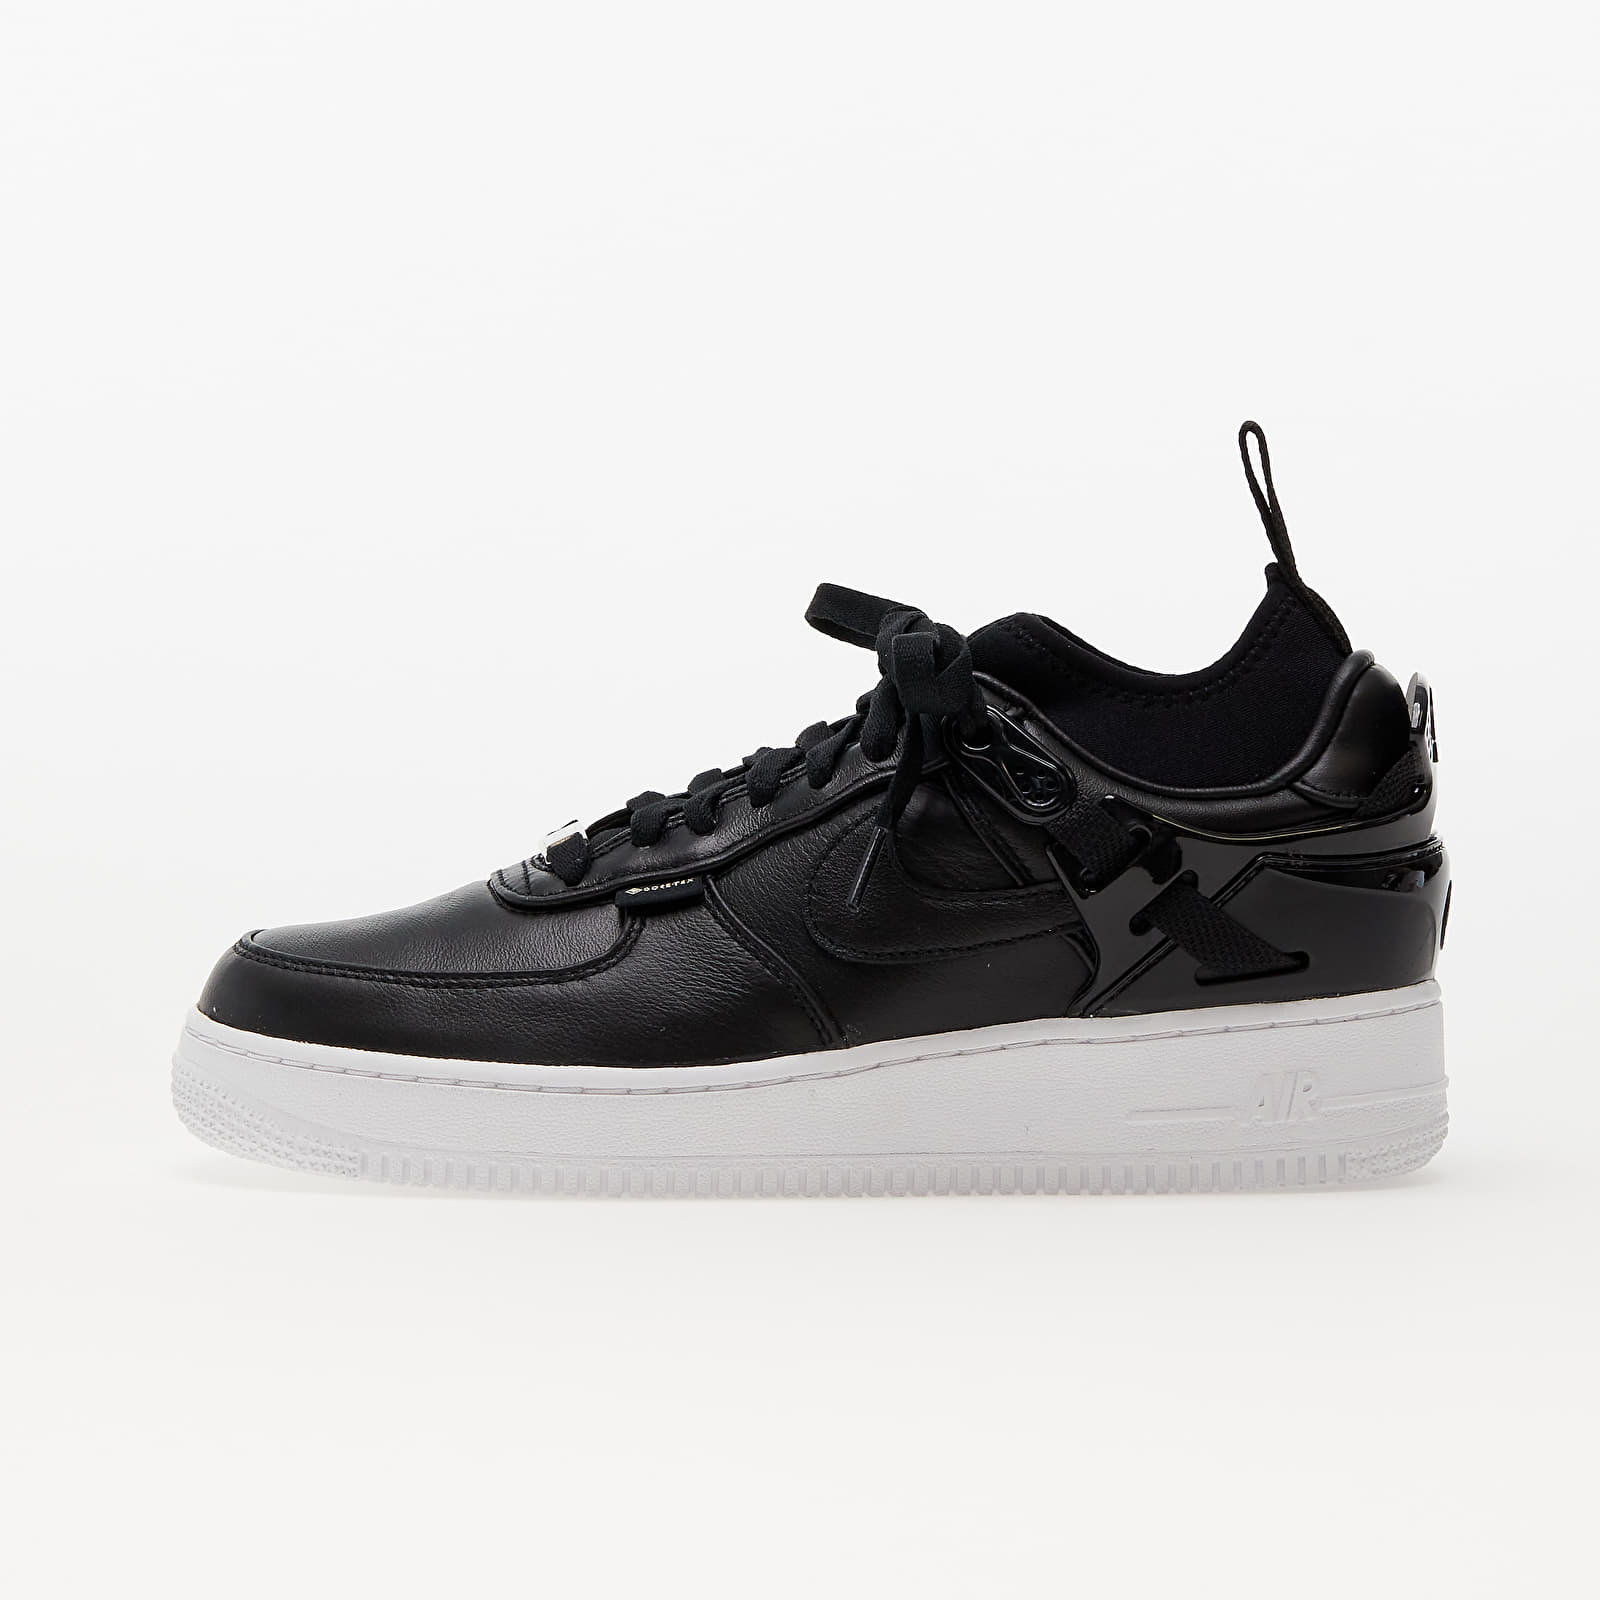 Nike x Undercover Air Force 1 Low SP